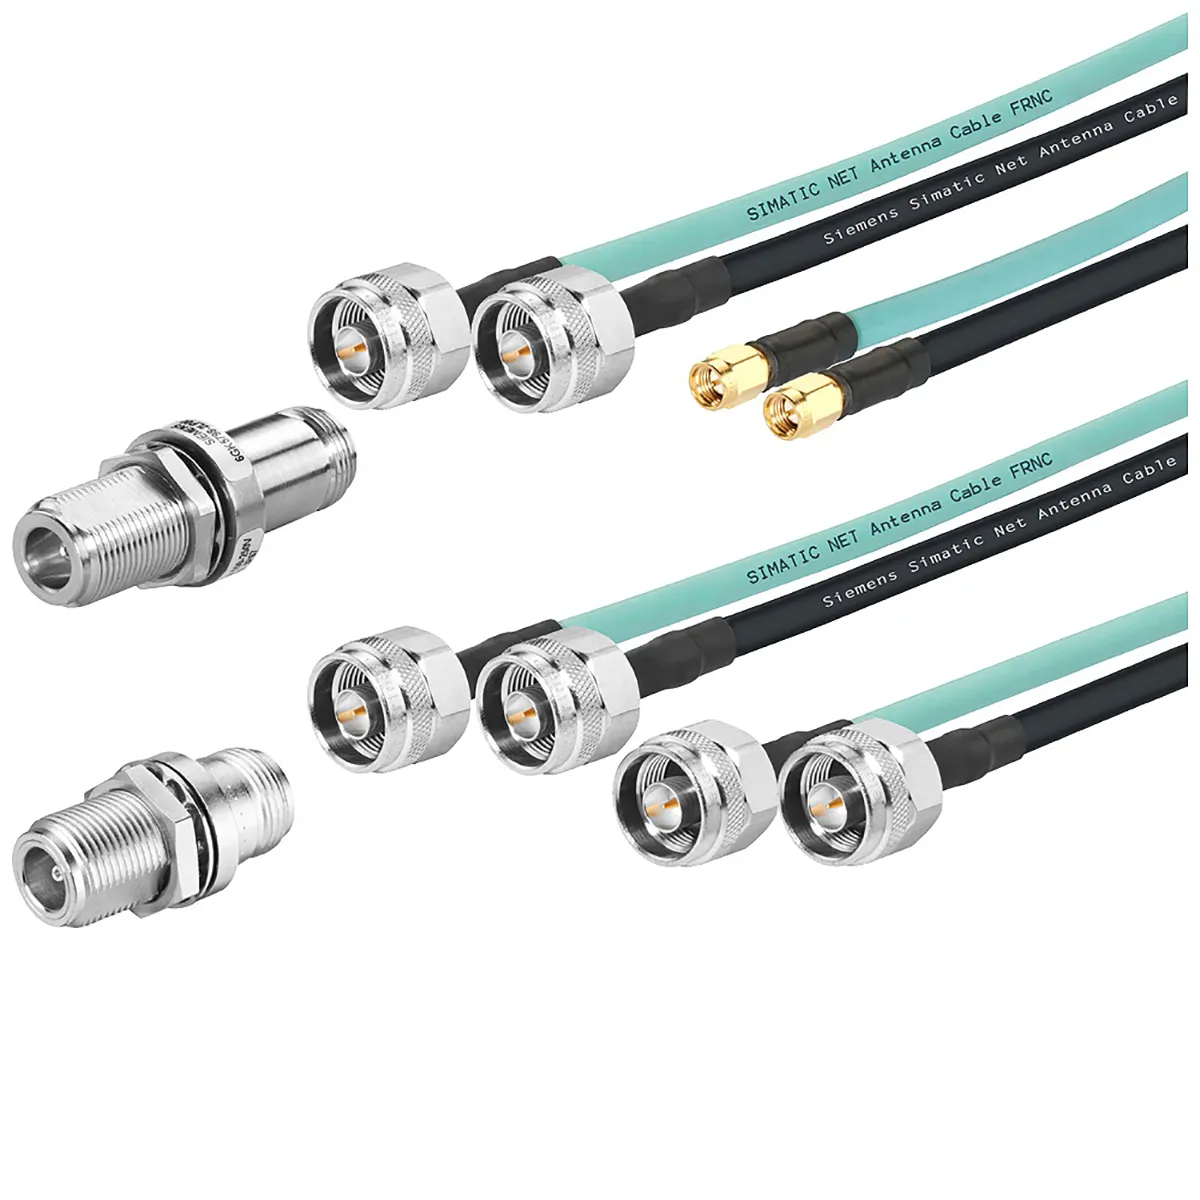 6XV1861-4AT10 IE FC TP standard cable 2x2 4 core CAT5 universal 100m